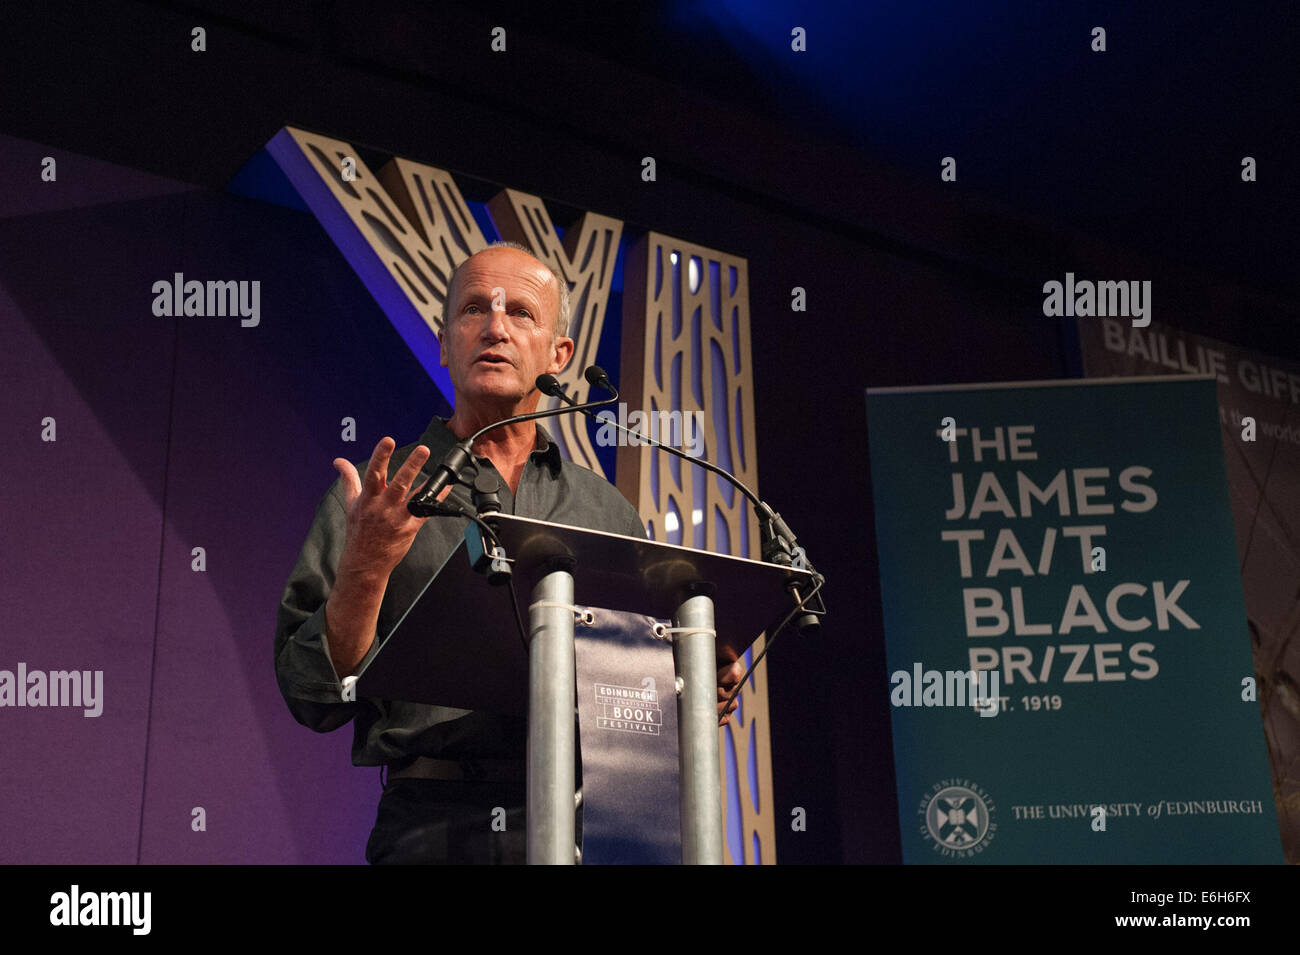 Edinburgh, UK. 23rd Aug, 2014. British writer Jim Crace gives a speech after receiving the James Tait Black Prizes' fiction category prize for his novel Harvest inspired by the daily toil of a shepherdess. The winners of Britain's oldest literary awards were announced on Saturday at an evening event during the ongoing Edinburgh International Book Festival. Credit:  Stringer/Xinhua/Alamy Live News Stock Photo